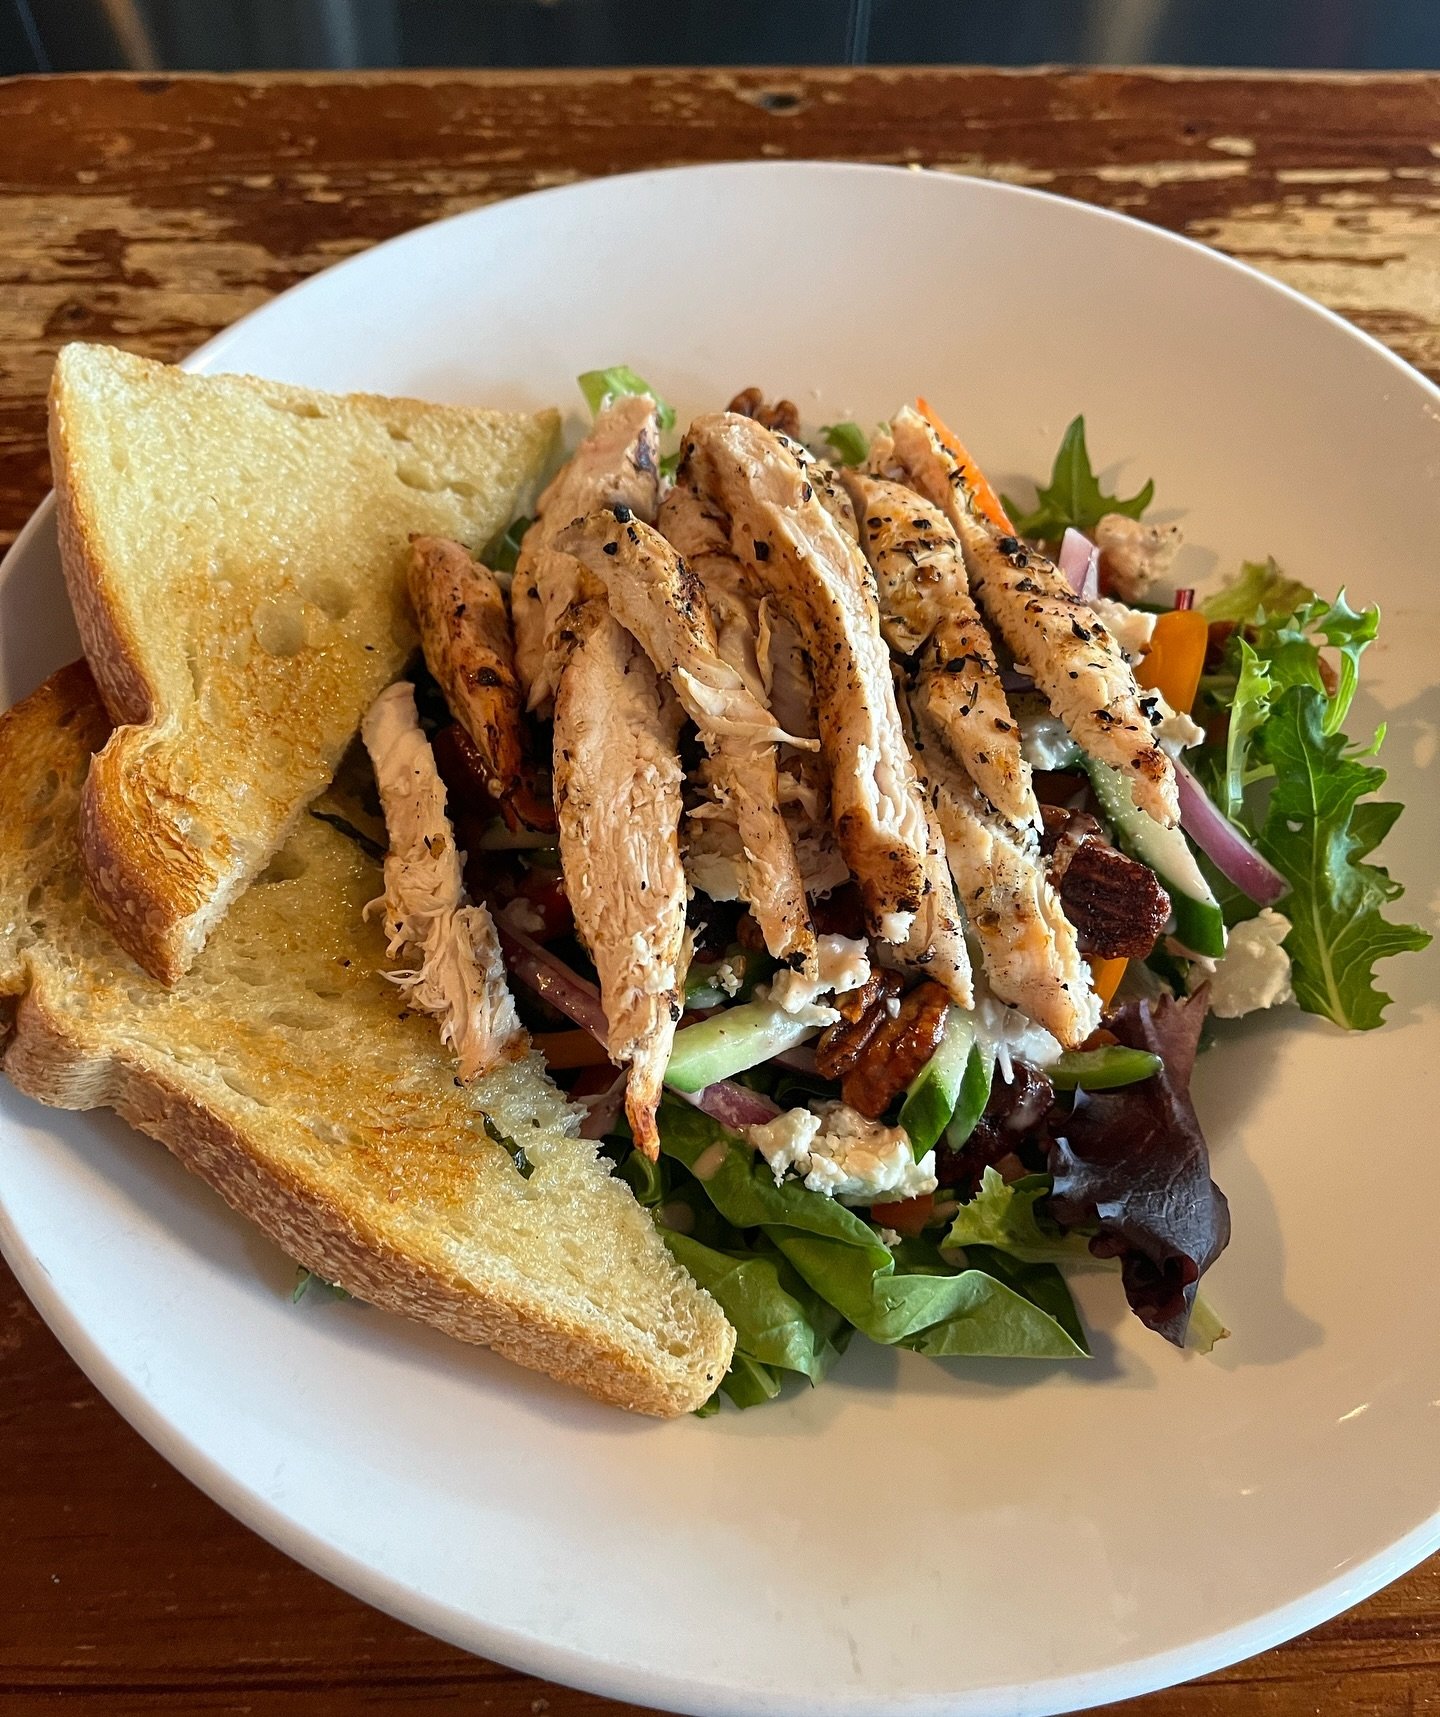 Tipper Big Salad 🥬
~ spring mix, avocado, sweet peppers, red onion, cucumber, reggiano cheese, tomato, in-house candied pecans ~ 

[image shows a STAFF meal: no avocado, sub feta, add chicken and garlic sourdough bread $2.99]